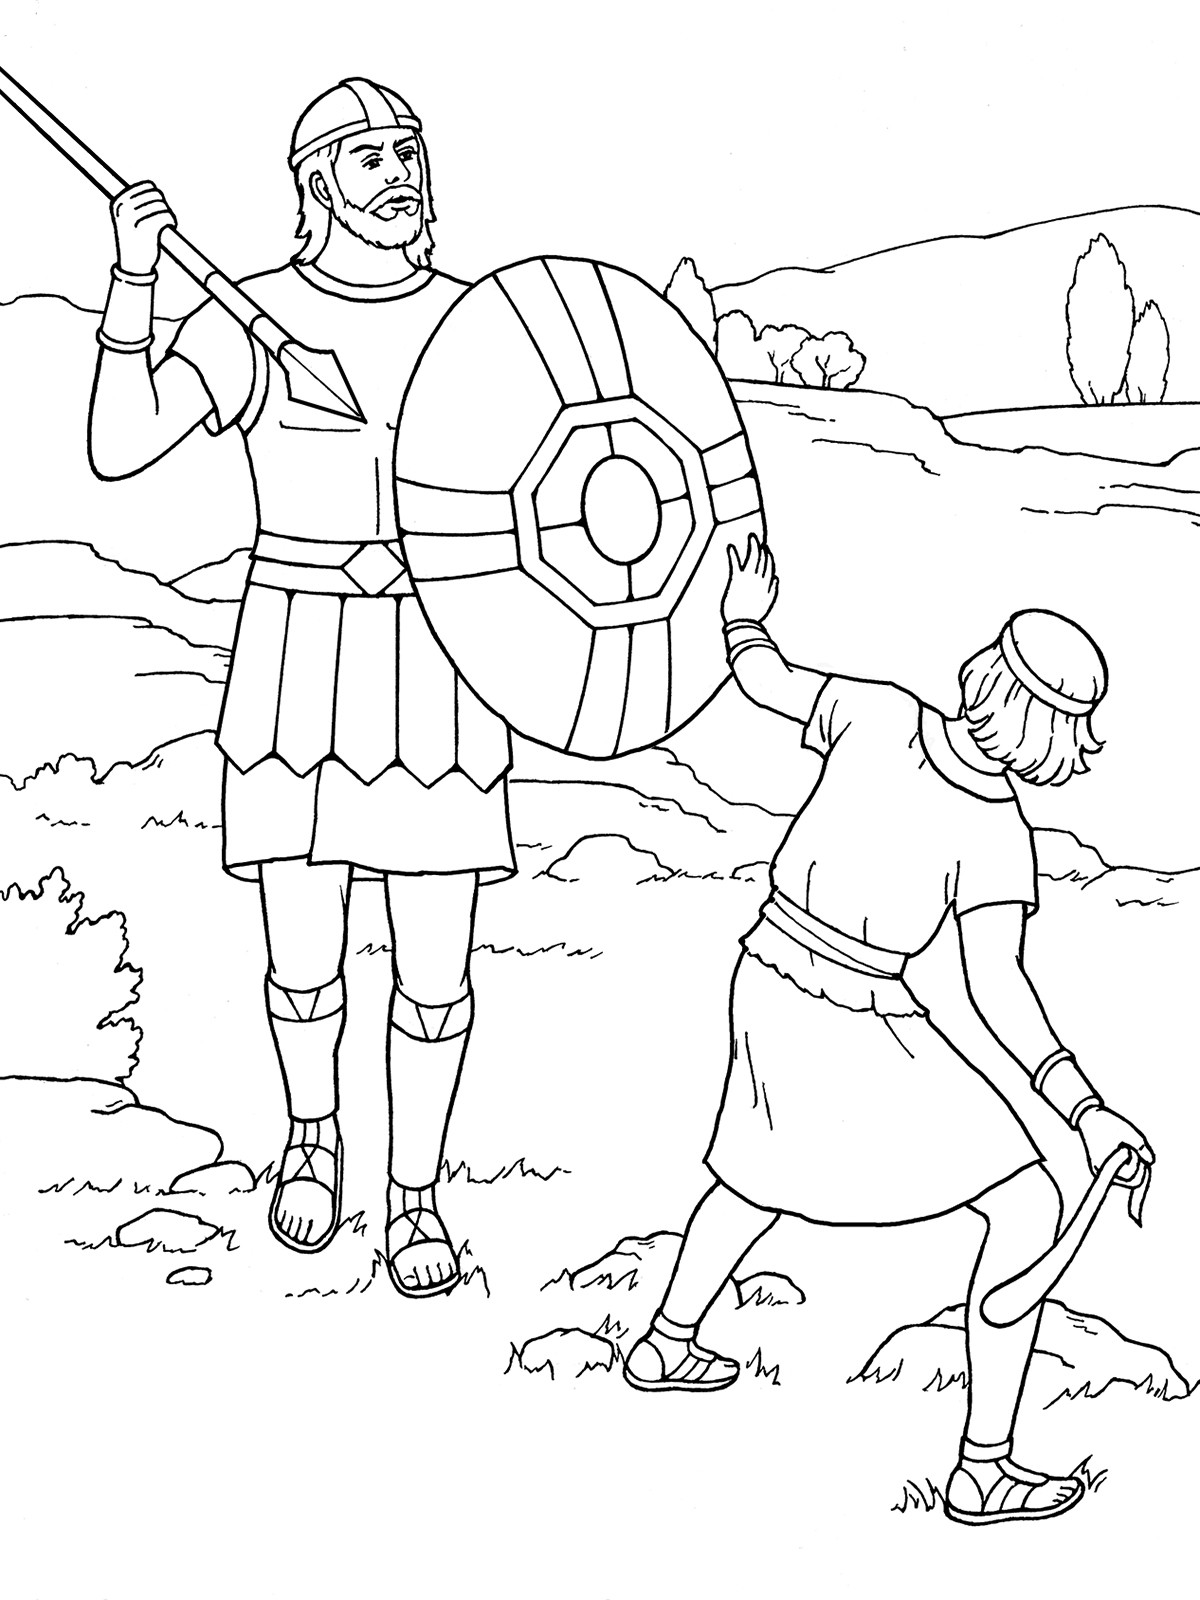 David And Goliath Coloring Pages
 David and Goliath